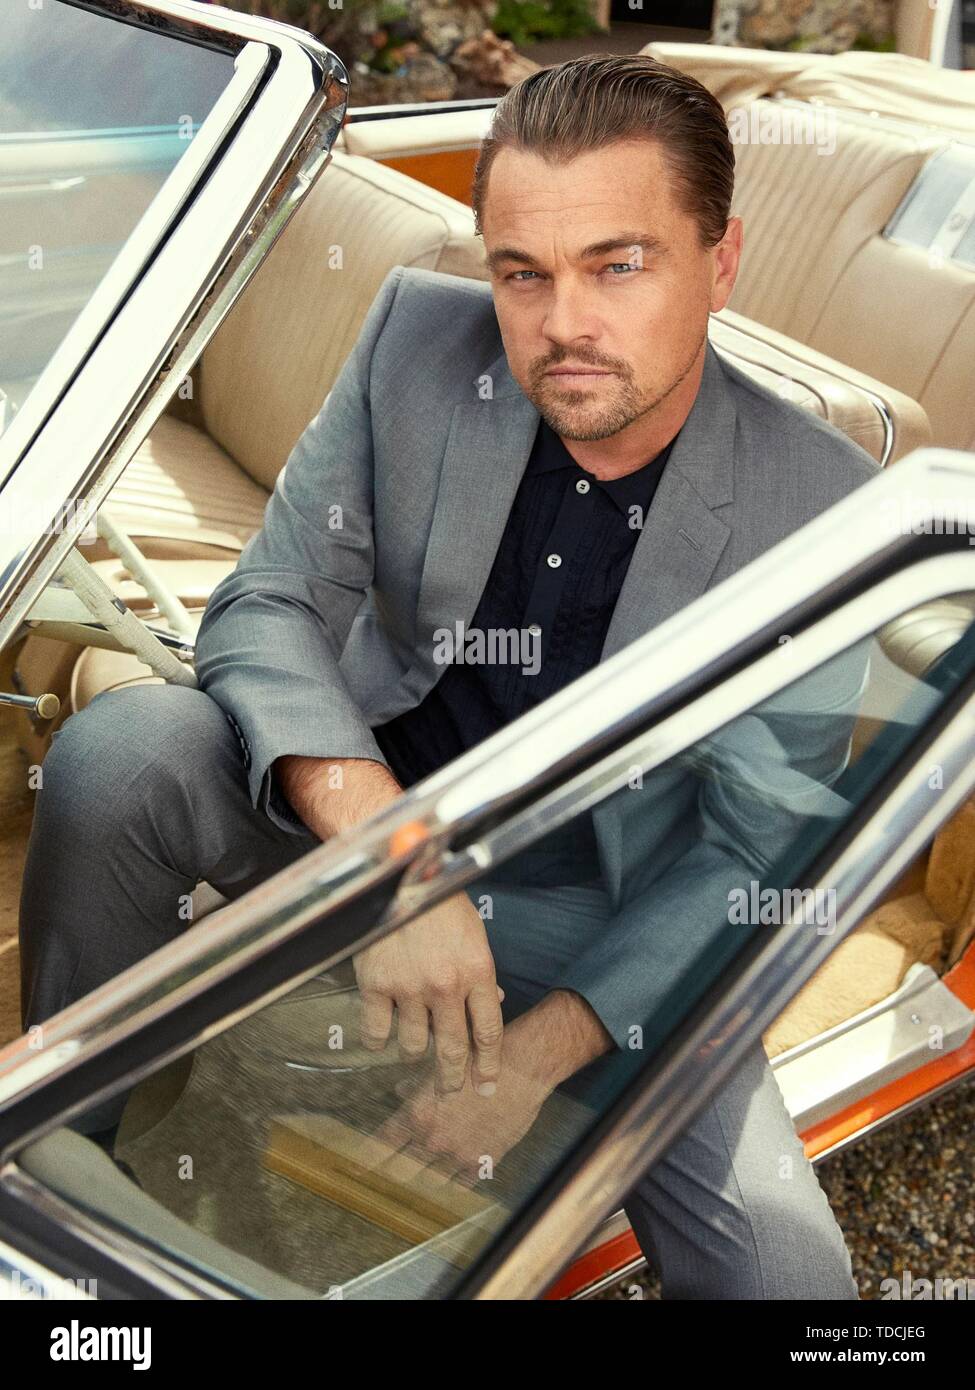 LEONARDO DICAPRIO in ONCE UPON A TIME IN HOLLYWOOD (2019). Credit: HEYDAY FILMS / Album Stock Photo